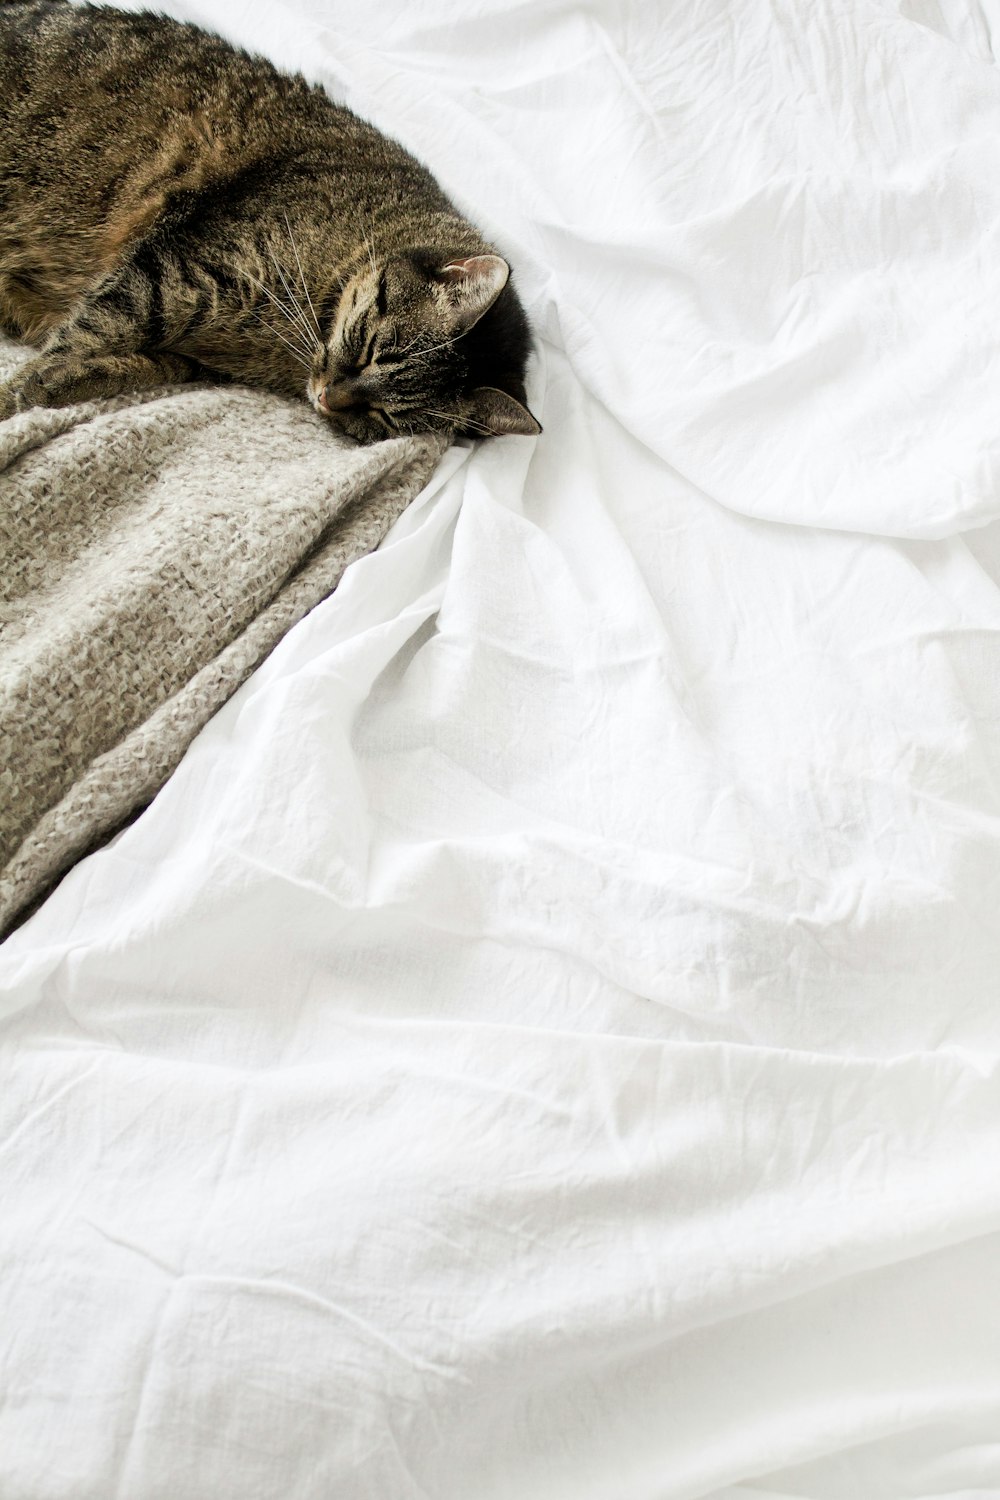 brown tabby cat laying on white textile